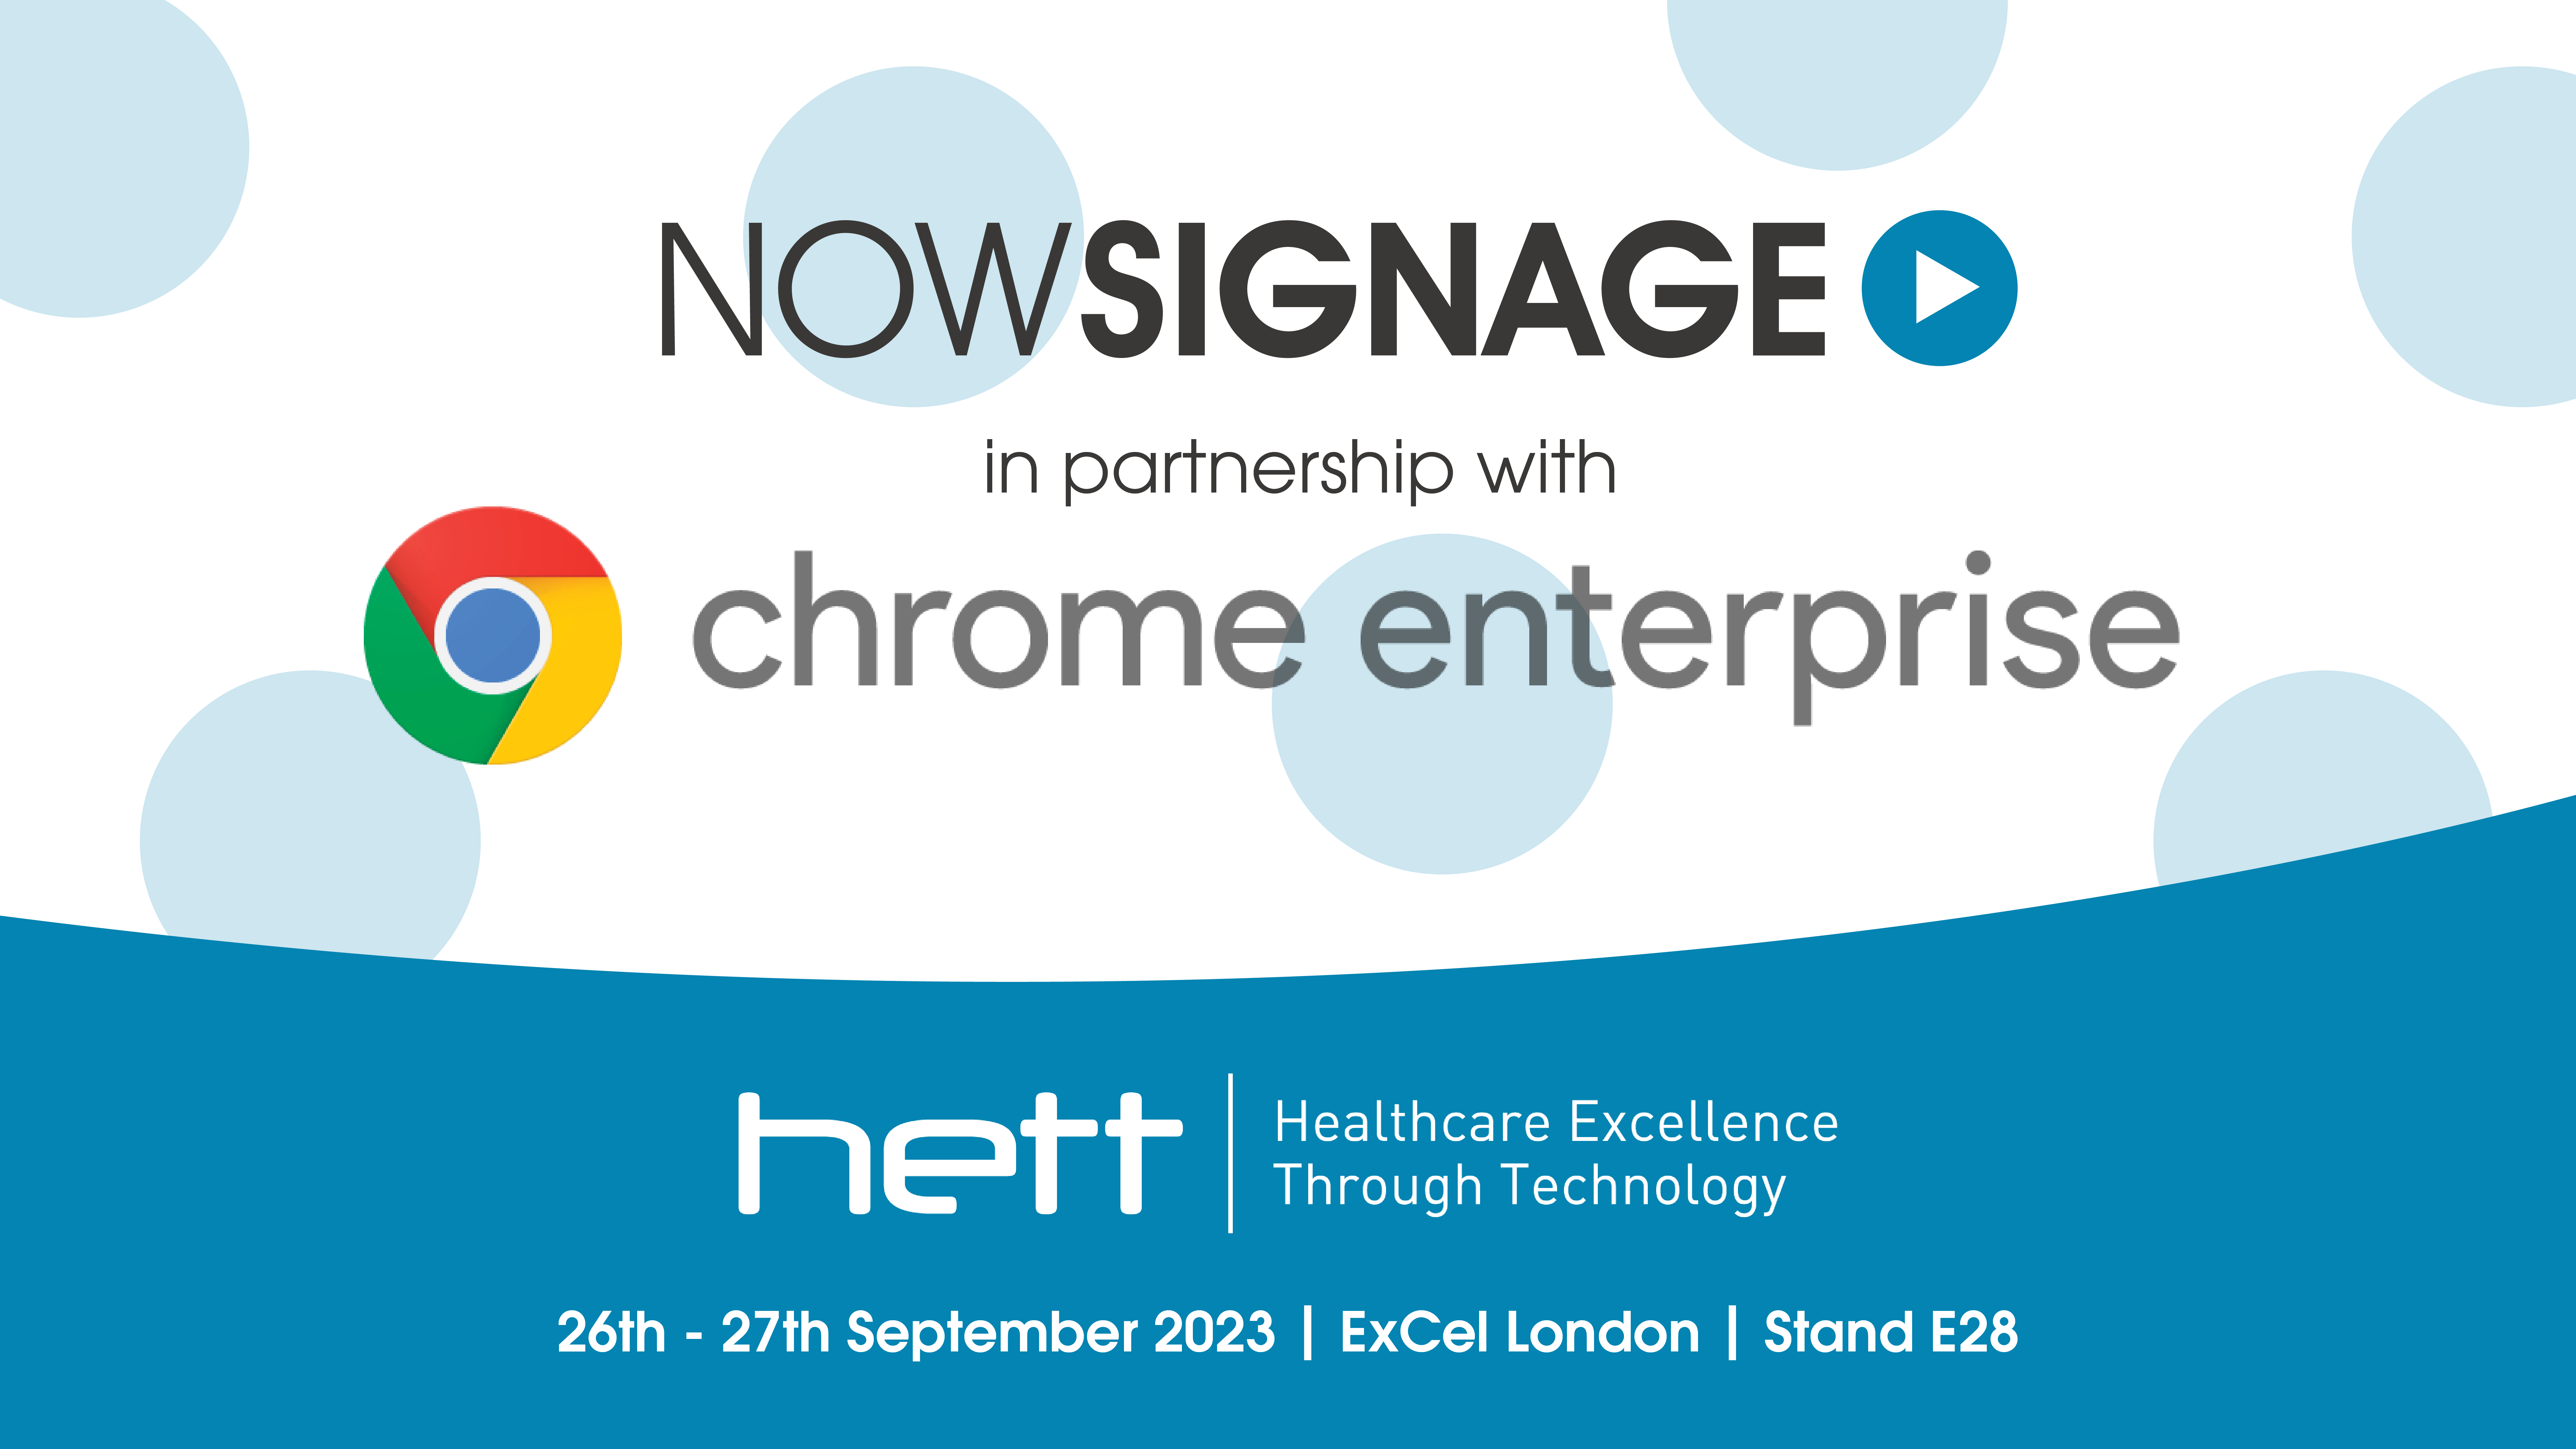 Find NowSignage at HETT 2023 with Google